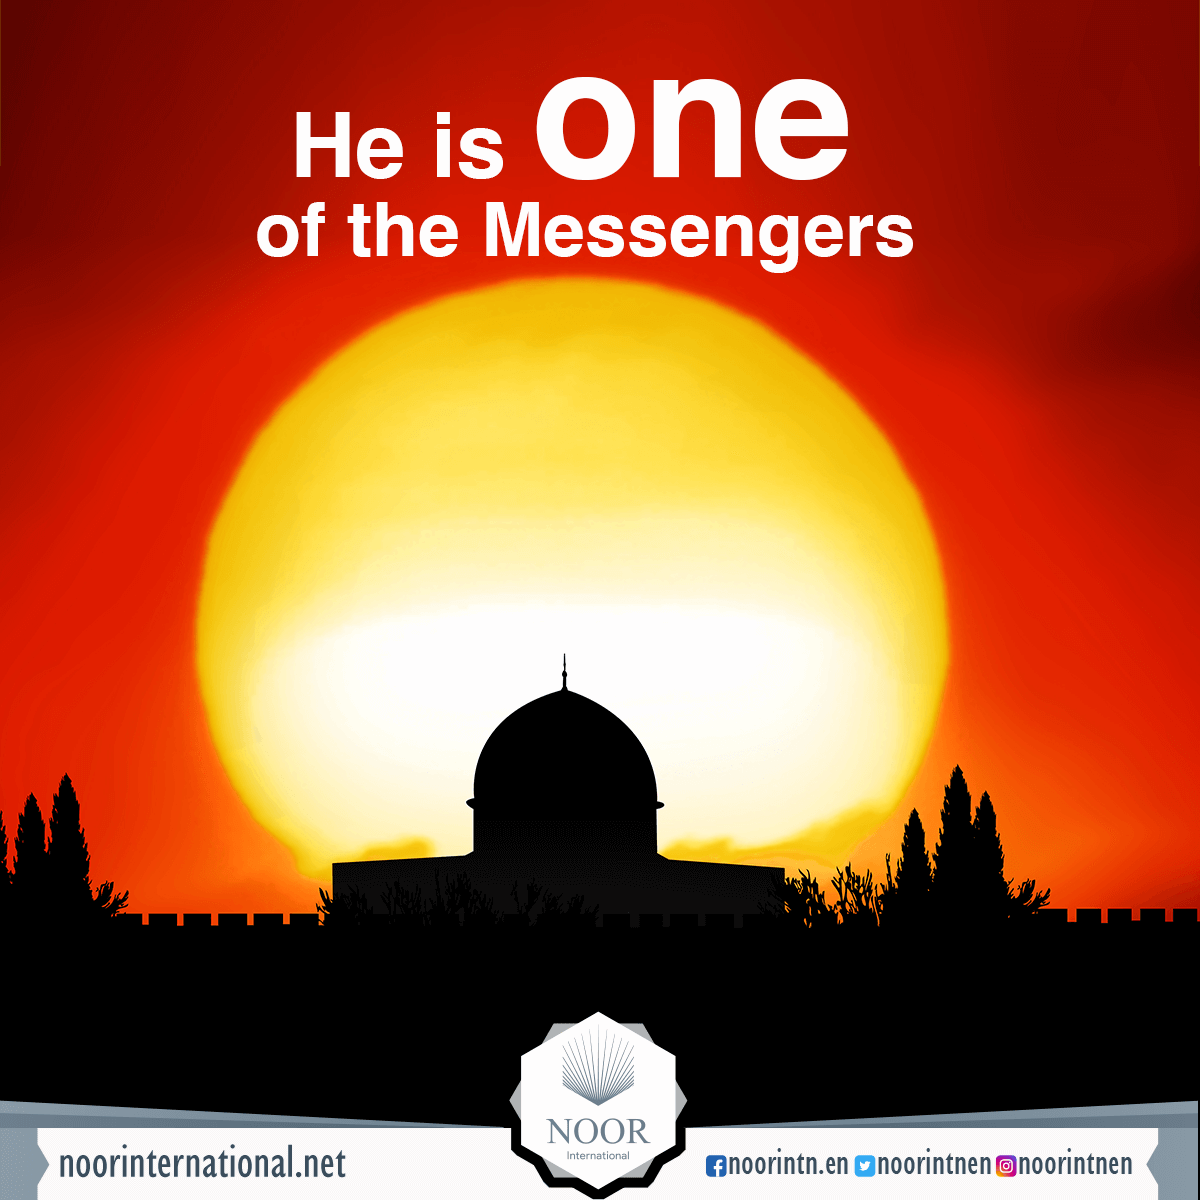 He is one of the Messengers